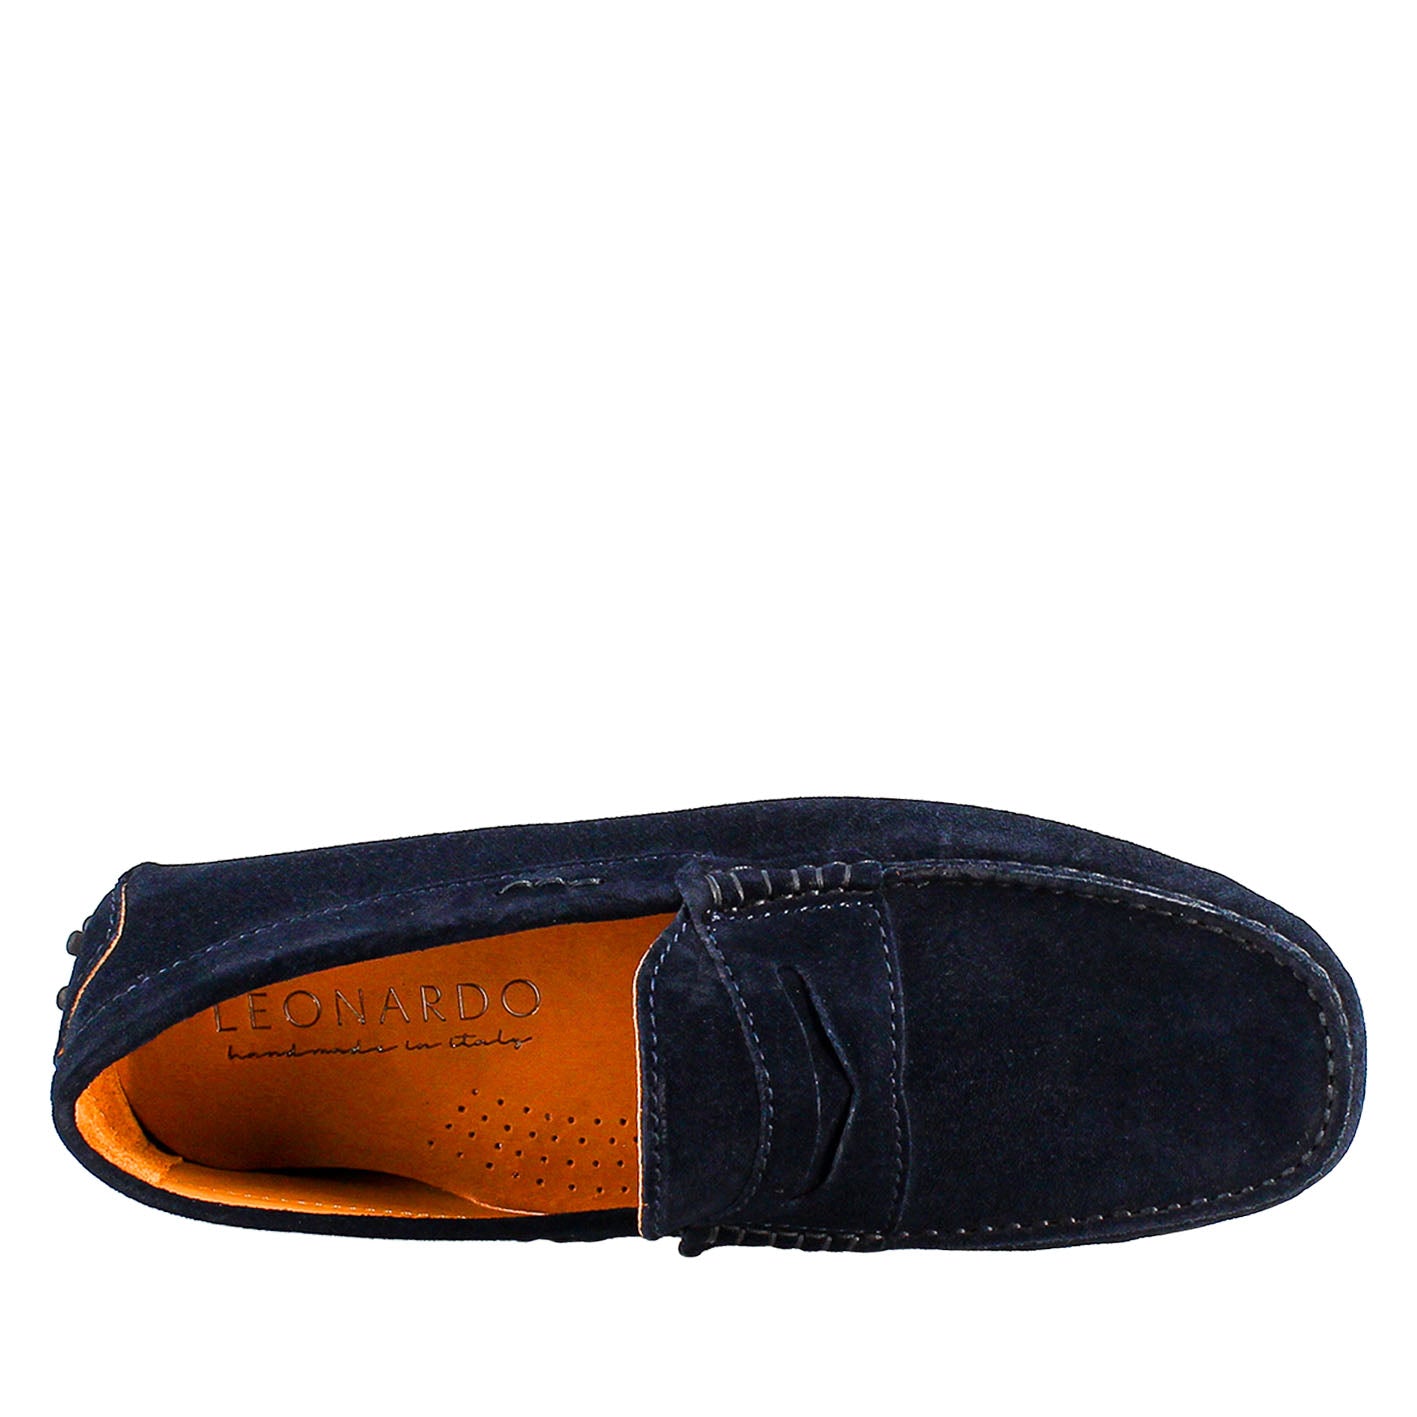 Handmade men's carshoe loafers in blue suede leather.